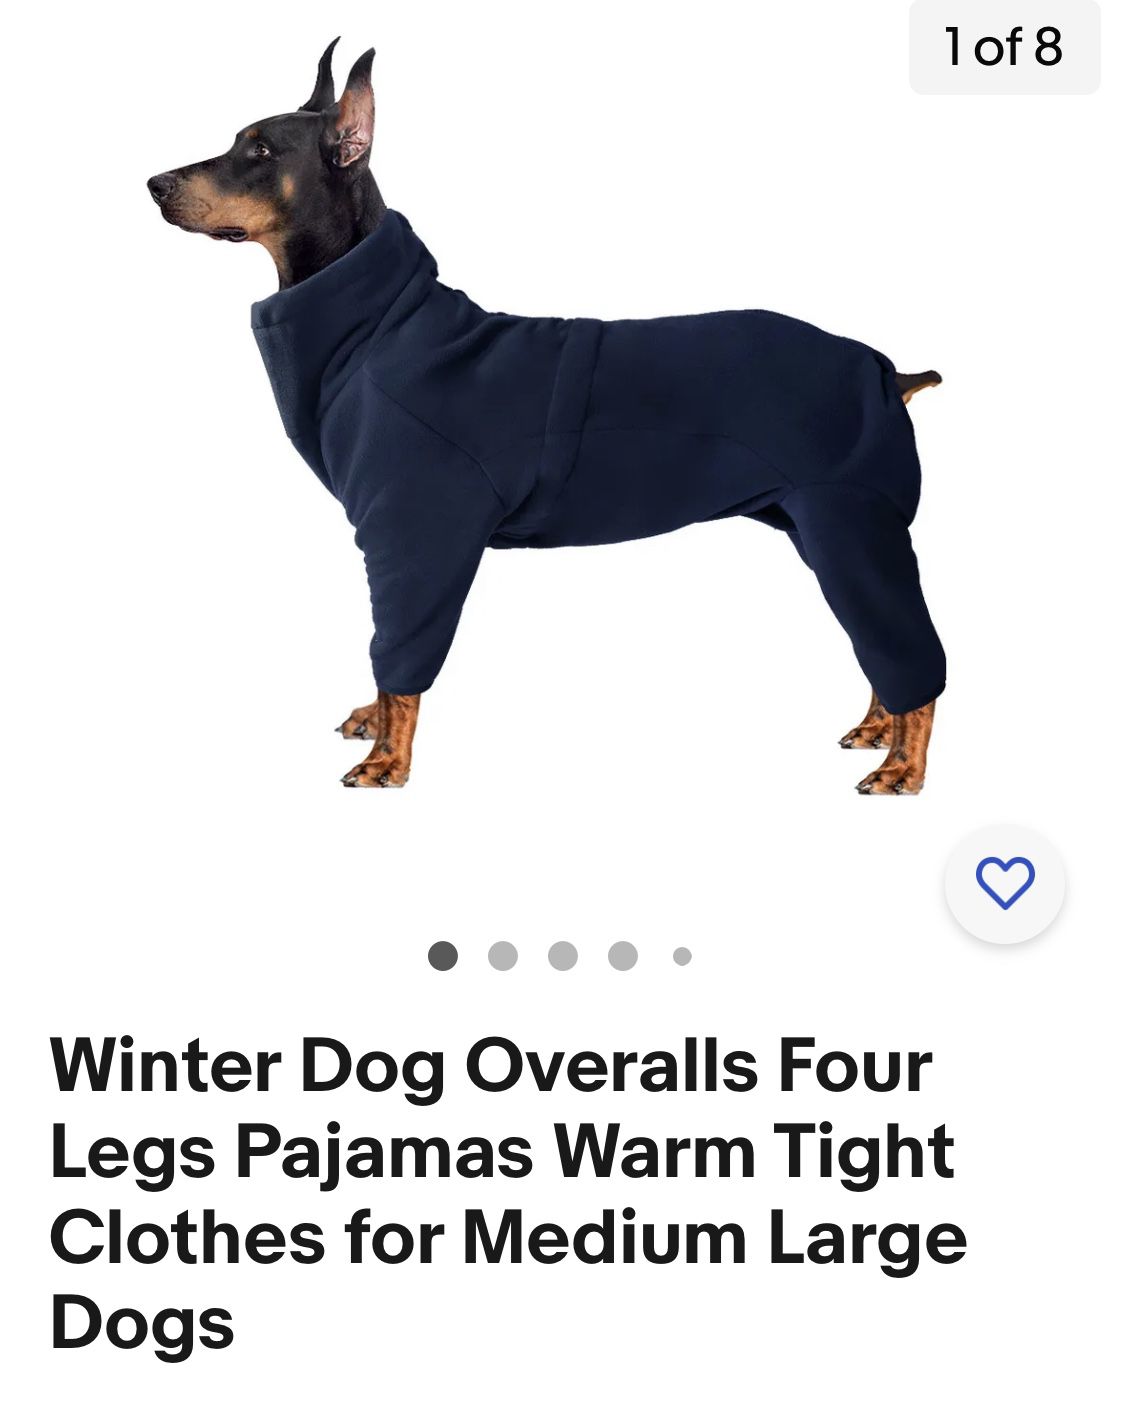 Winter Dog Cover All/Jacket